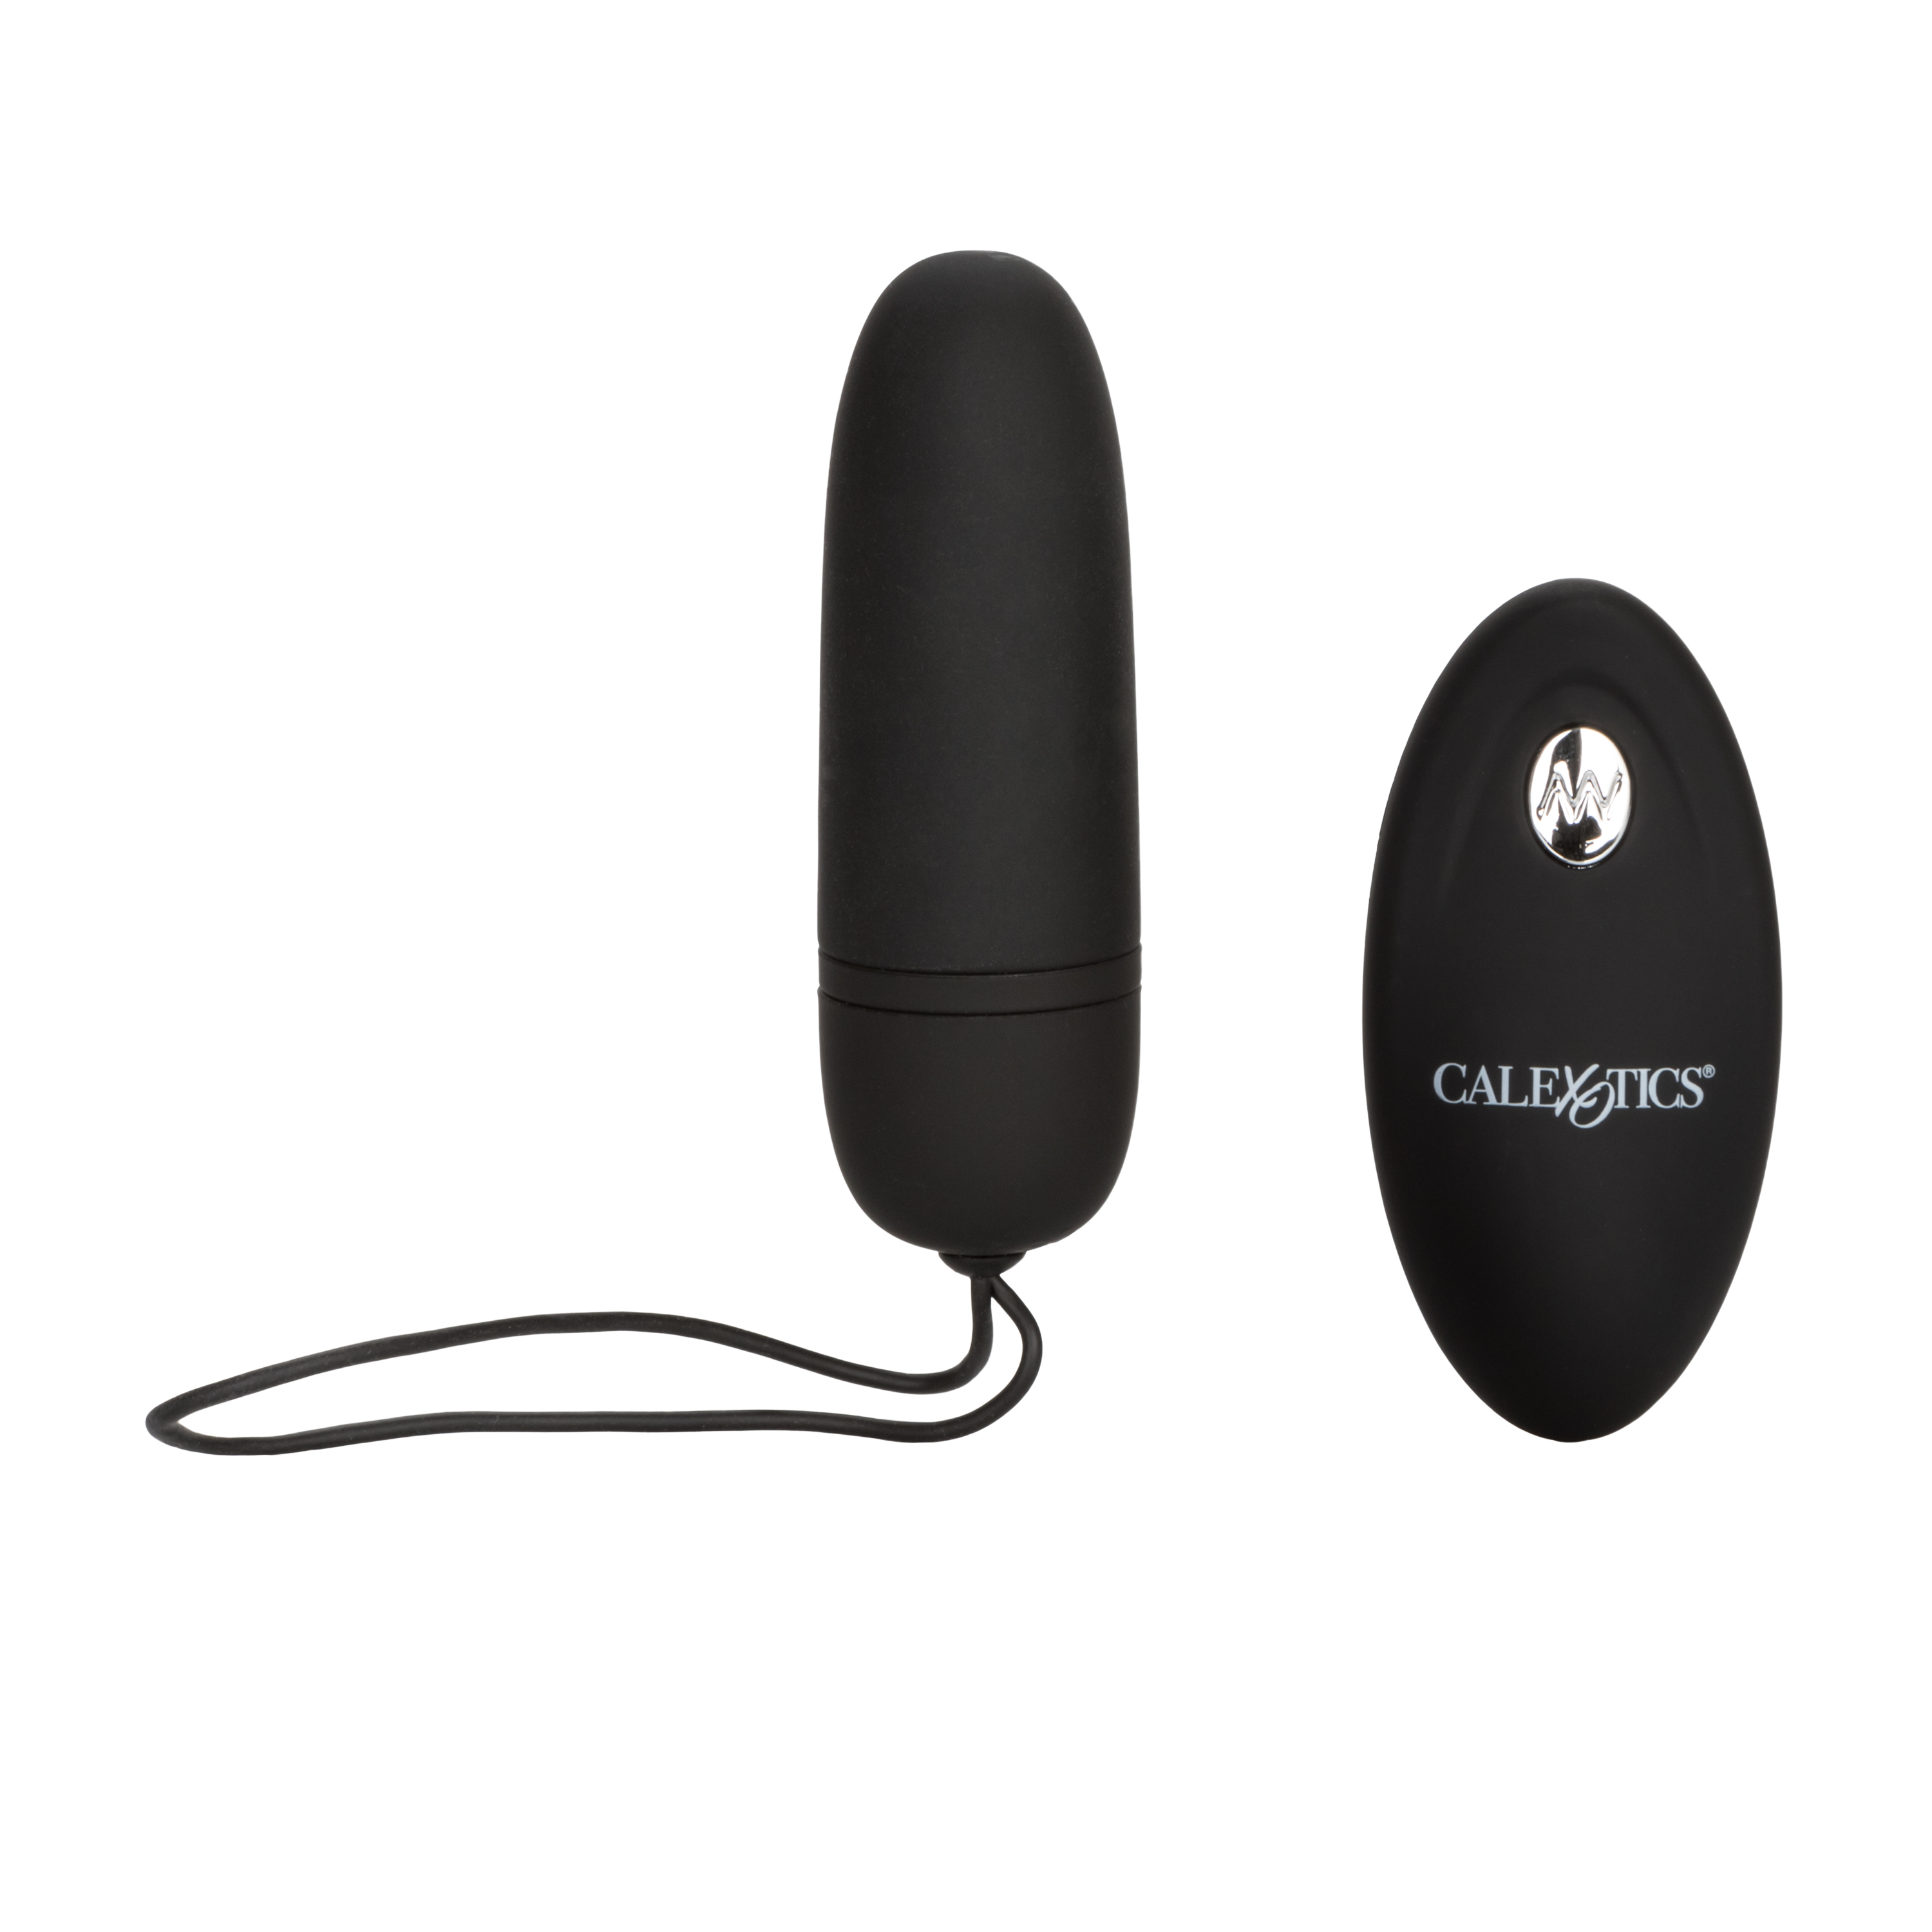 Silicone+Wireless+Remote+Bullet+Waterproof